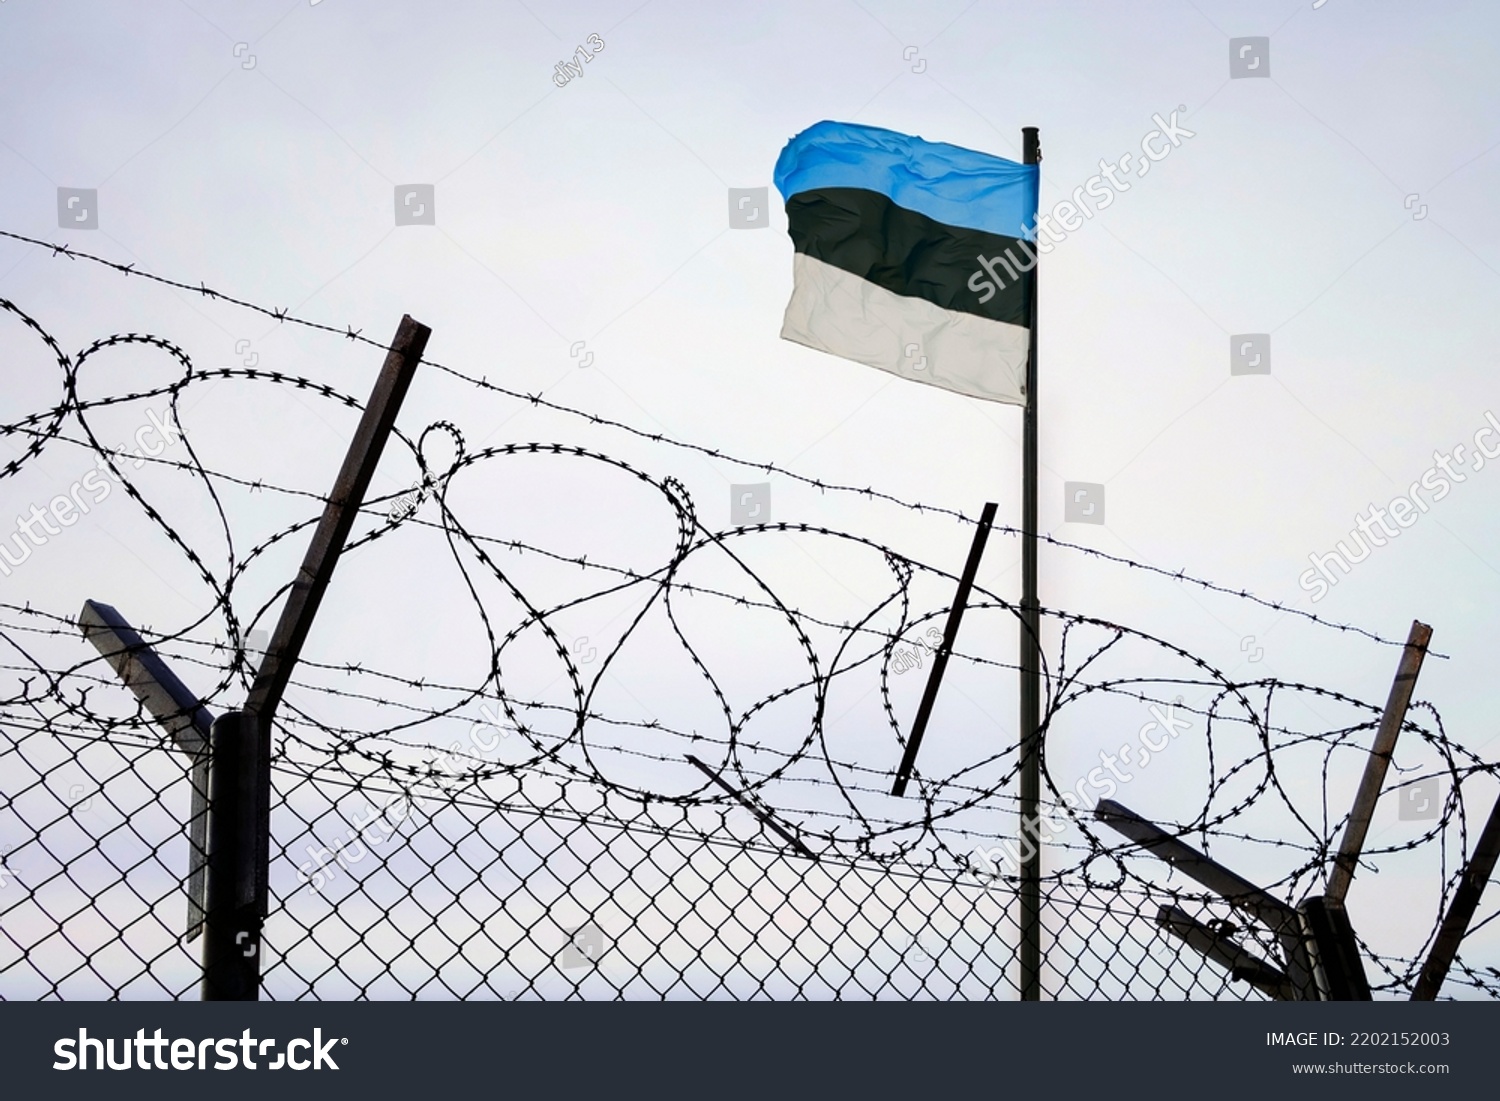 Concept of estonia closed borders with flag and wire fence. Ukraine immigration and homeland security. estonian Russian border #2202152003